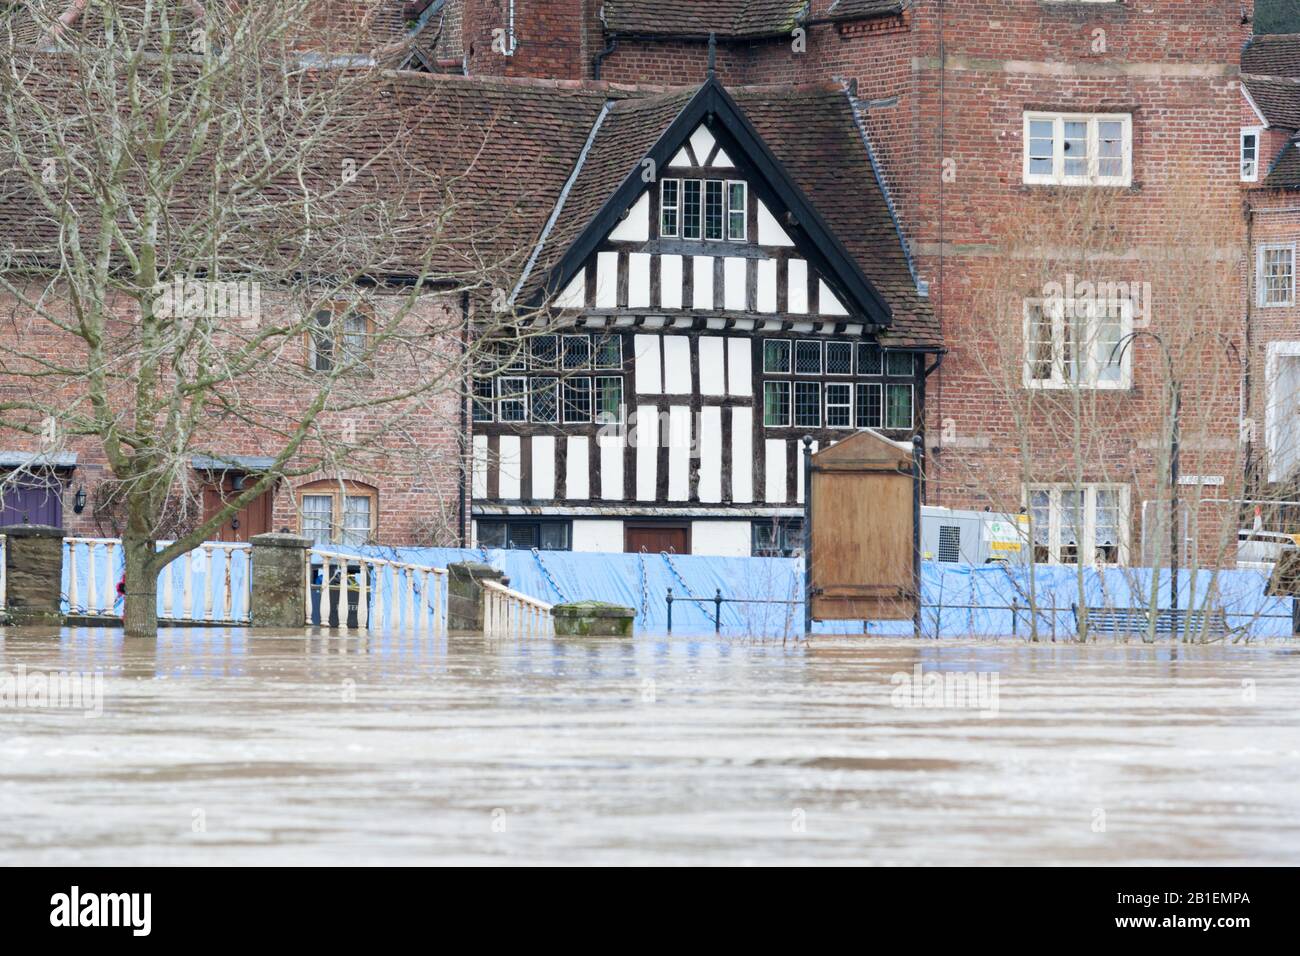 Bewdley, Worcestershire, UK. 25th Feb, 2020. The River Severn at Bewdley continues to rise after rain in Wales last weekend increased the flow. Flood barriers have been re-erected in the last 48 hours. Credit: Peter Lopeman/Alamy Live News Stock Photo